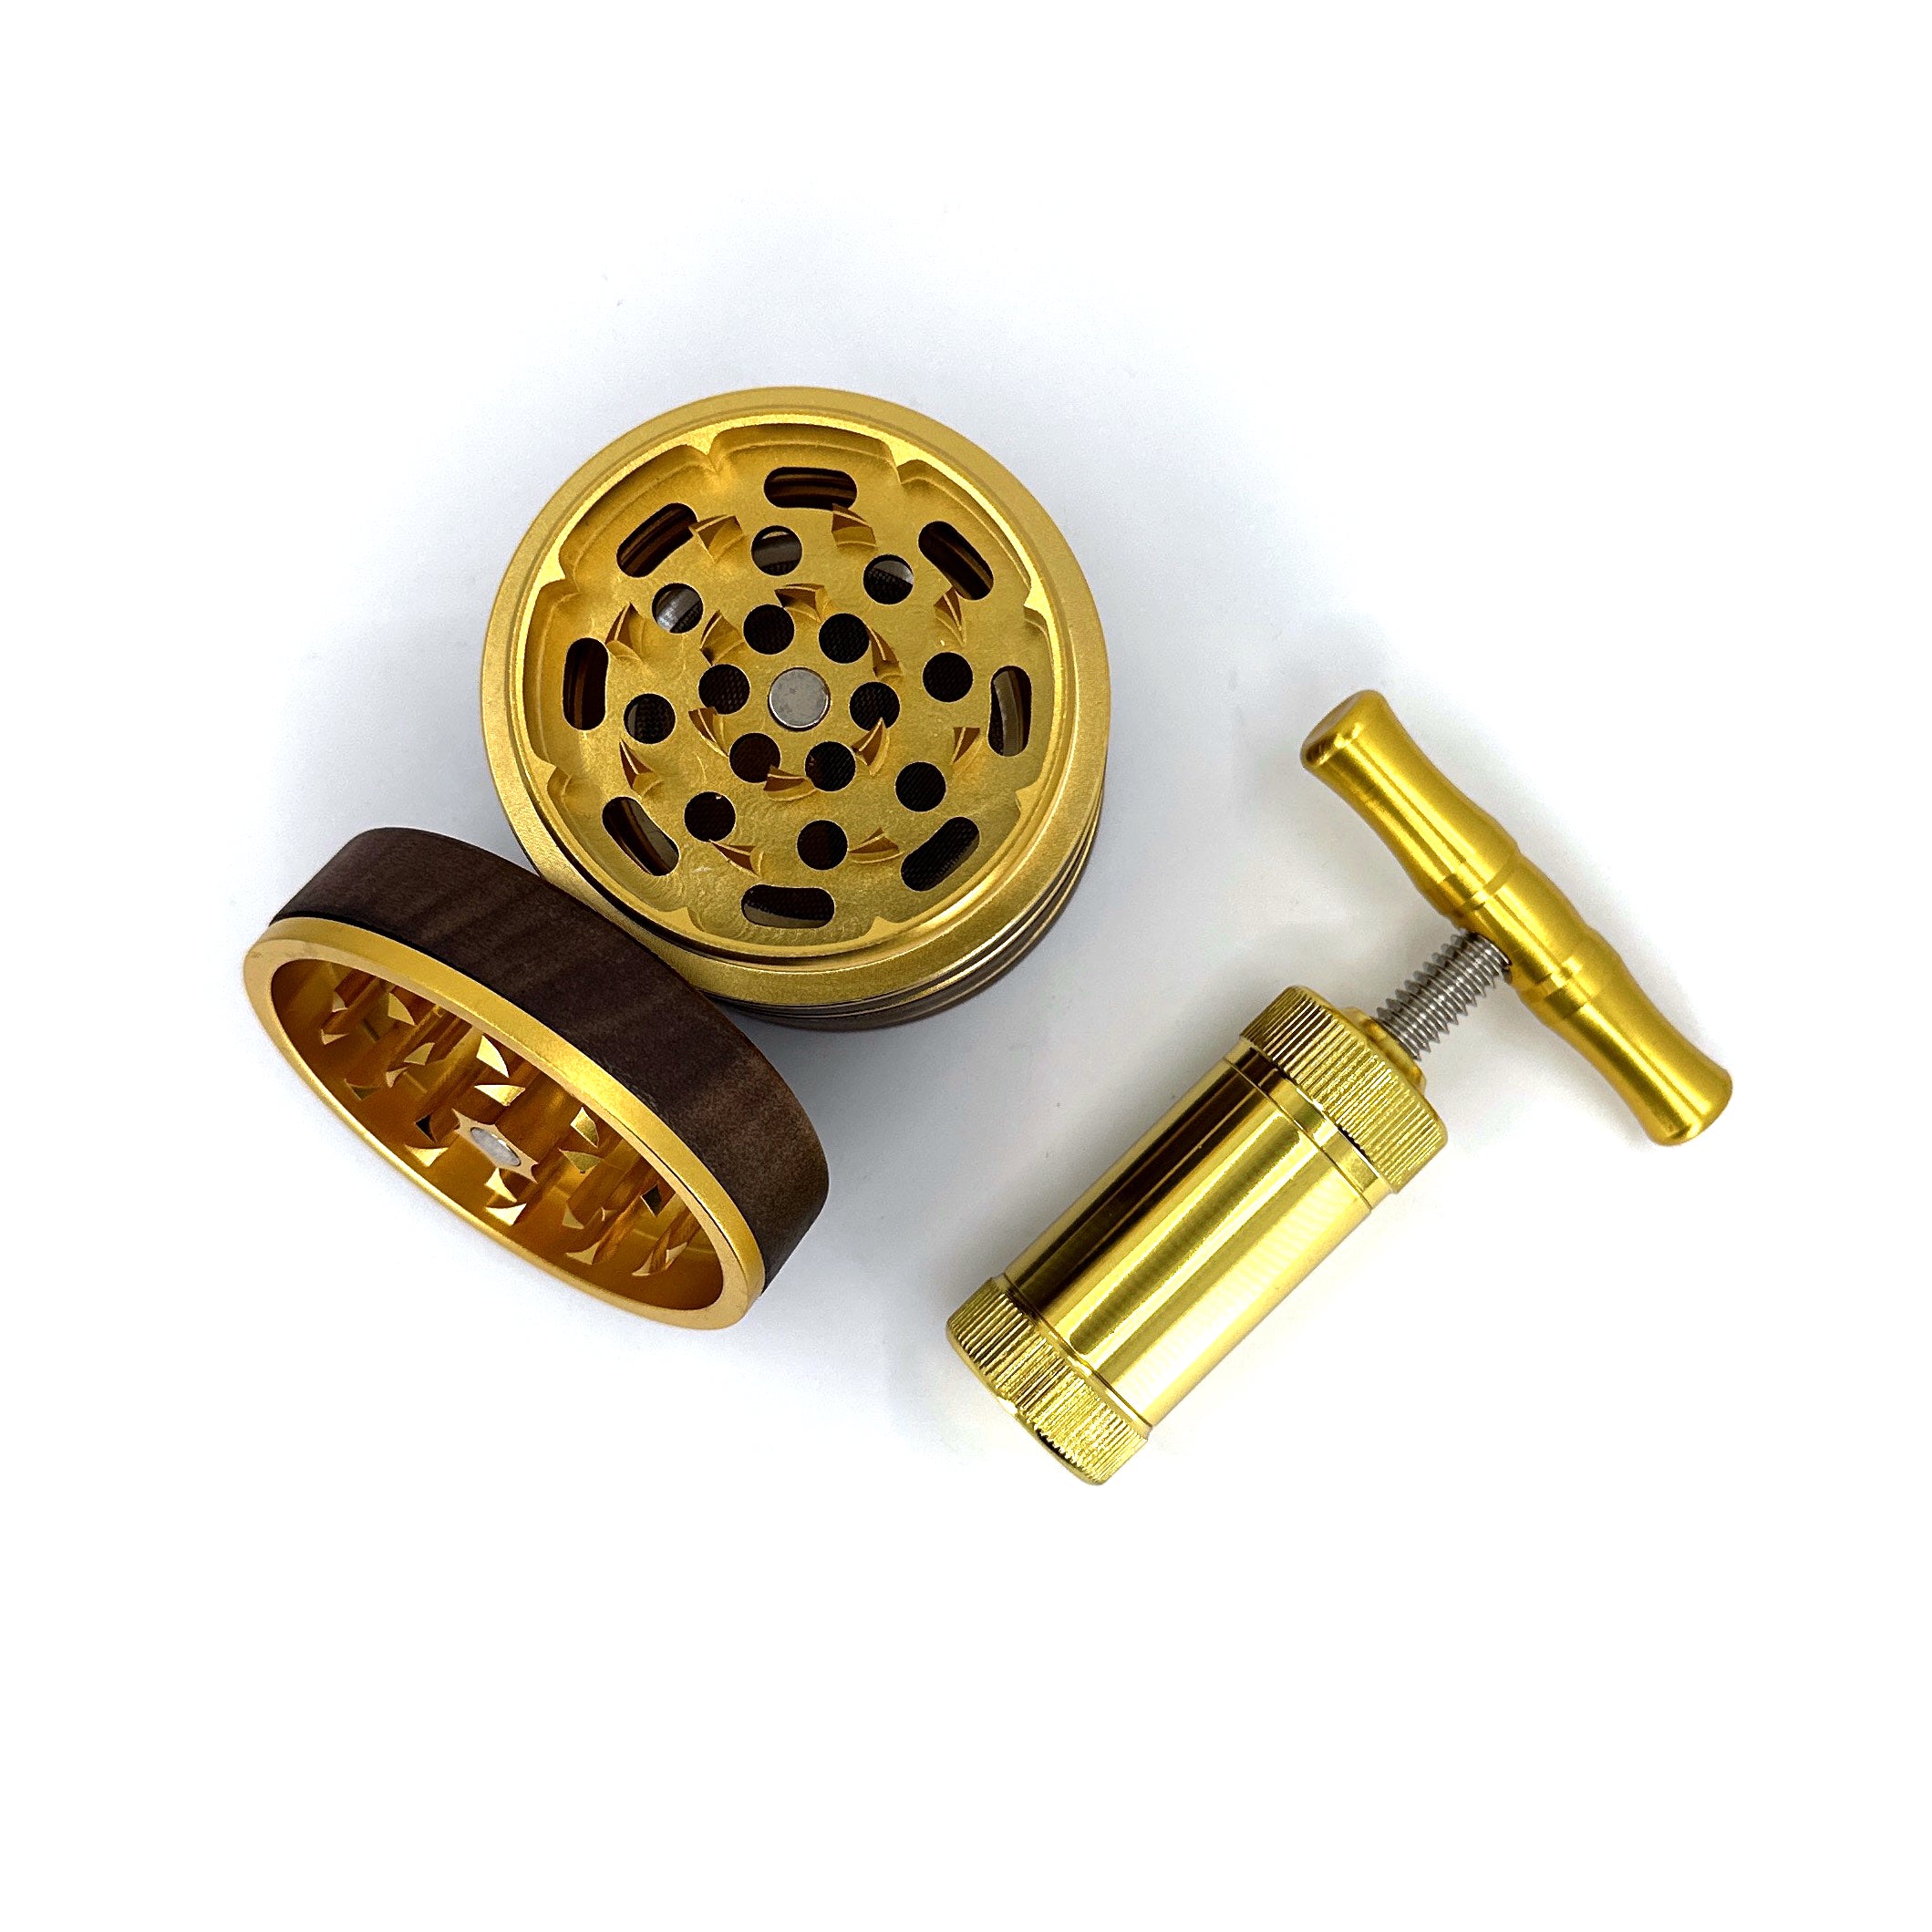 Gold four piece walnut spice grinder for weed and gold pollen press.